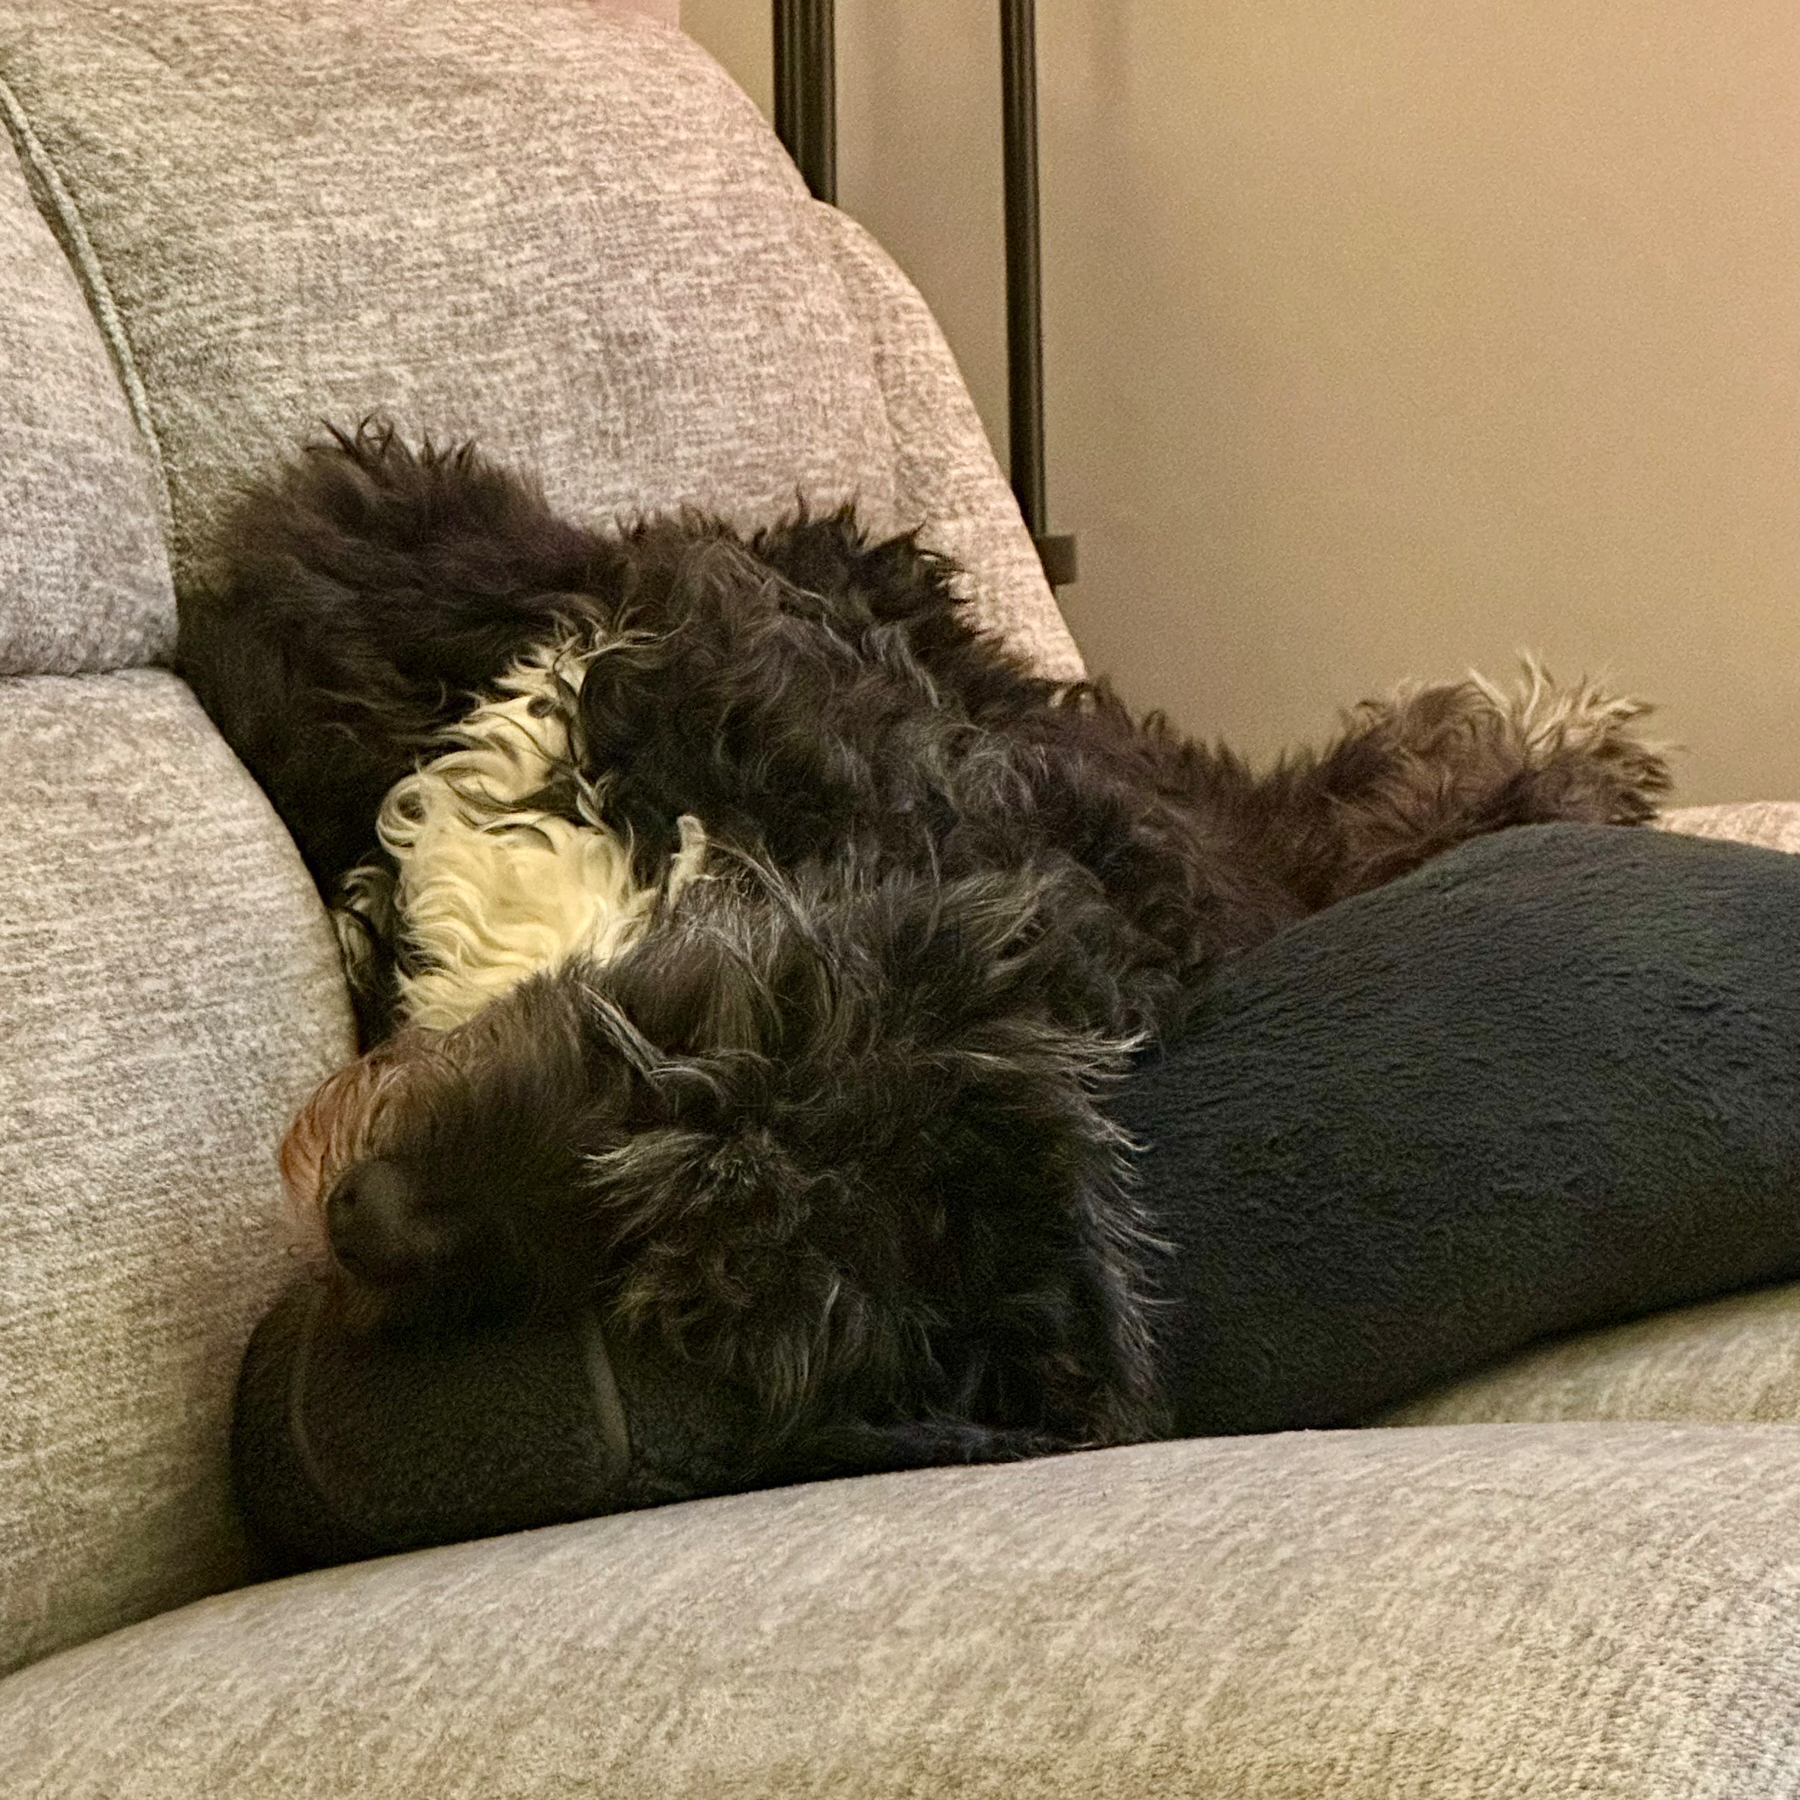 A black dog with curly fur is resting on a grey couch, partially nestled against a dark cushion.